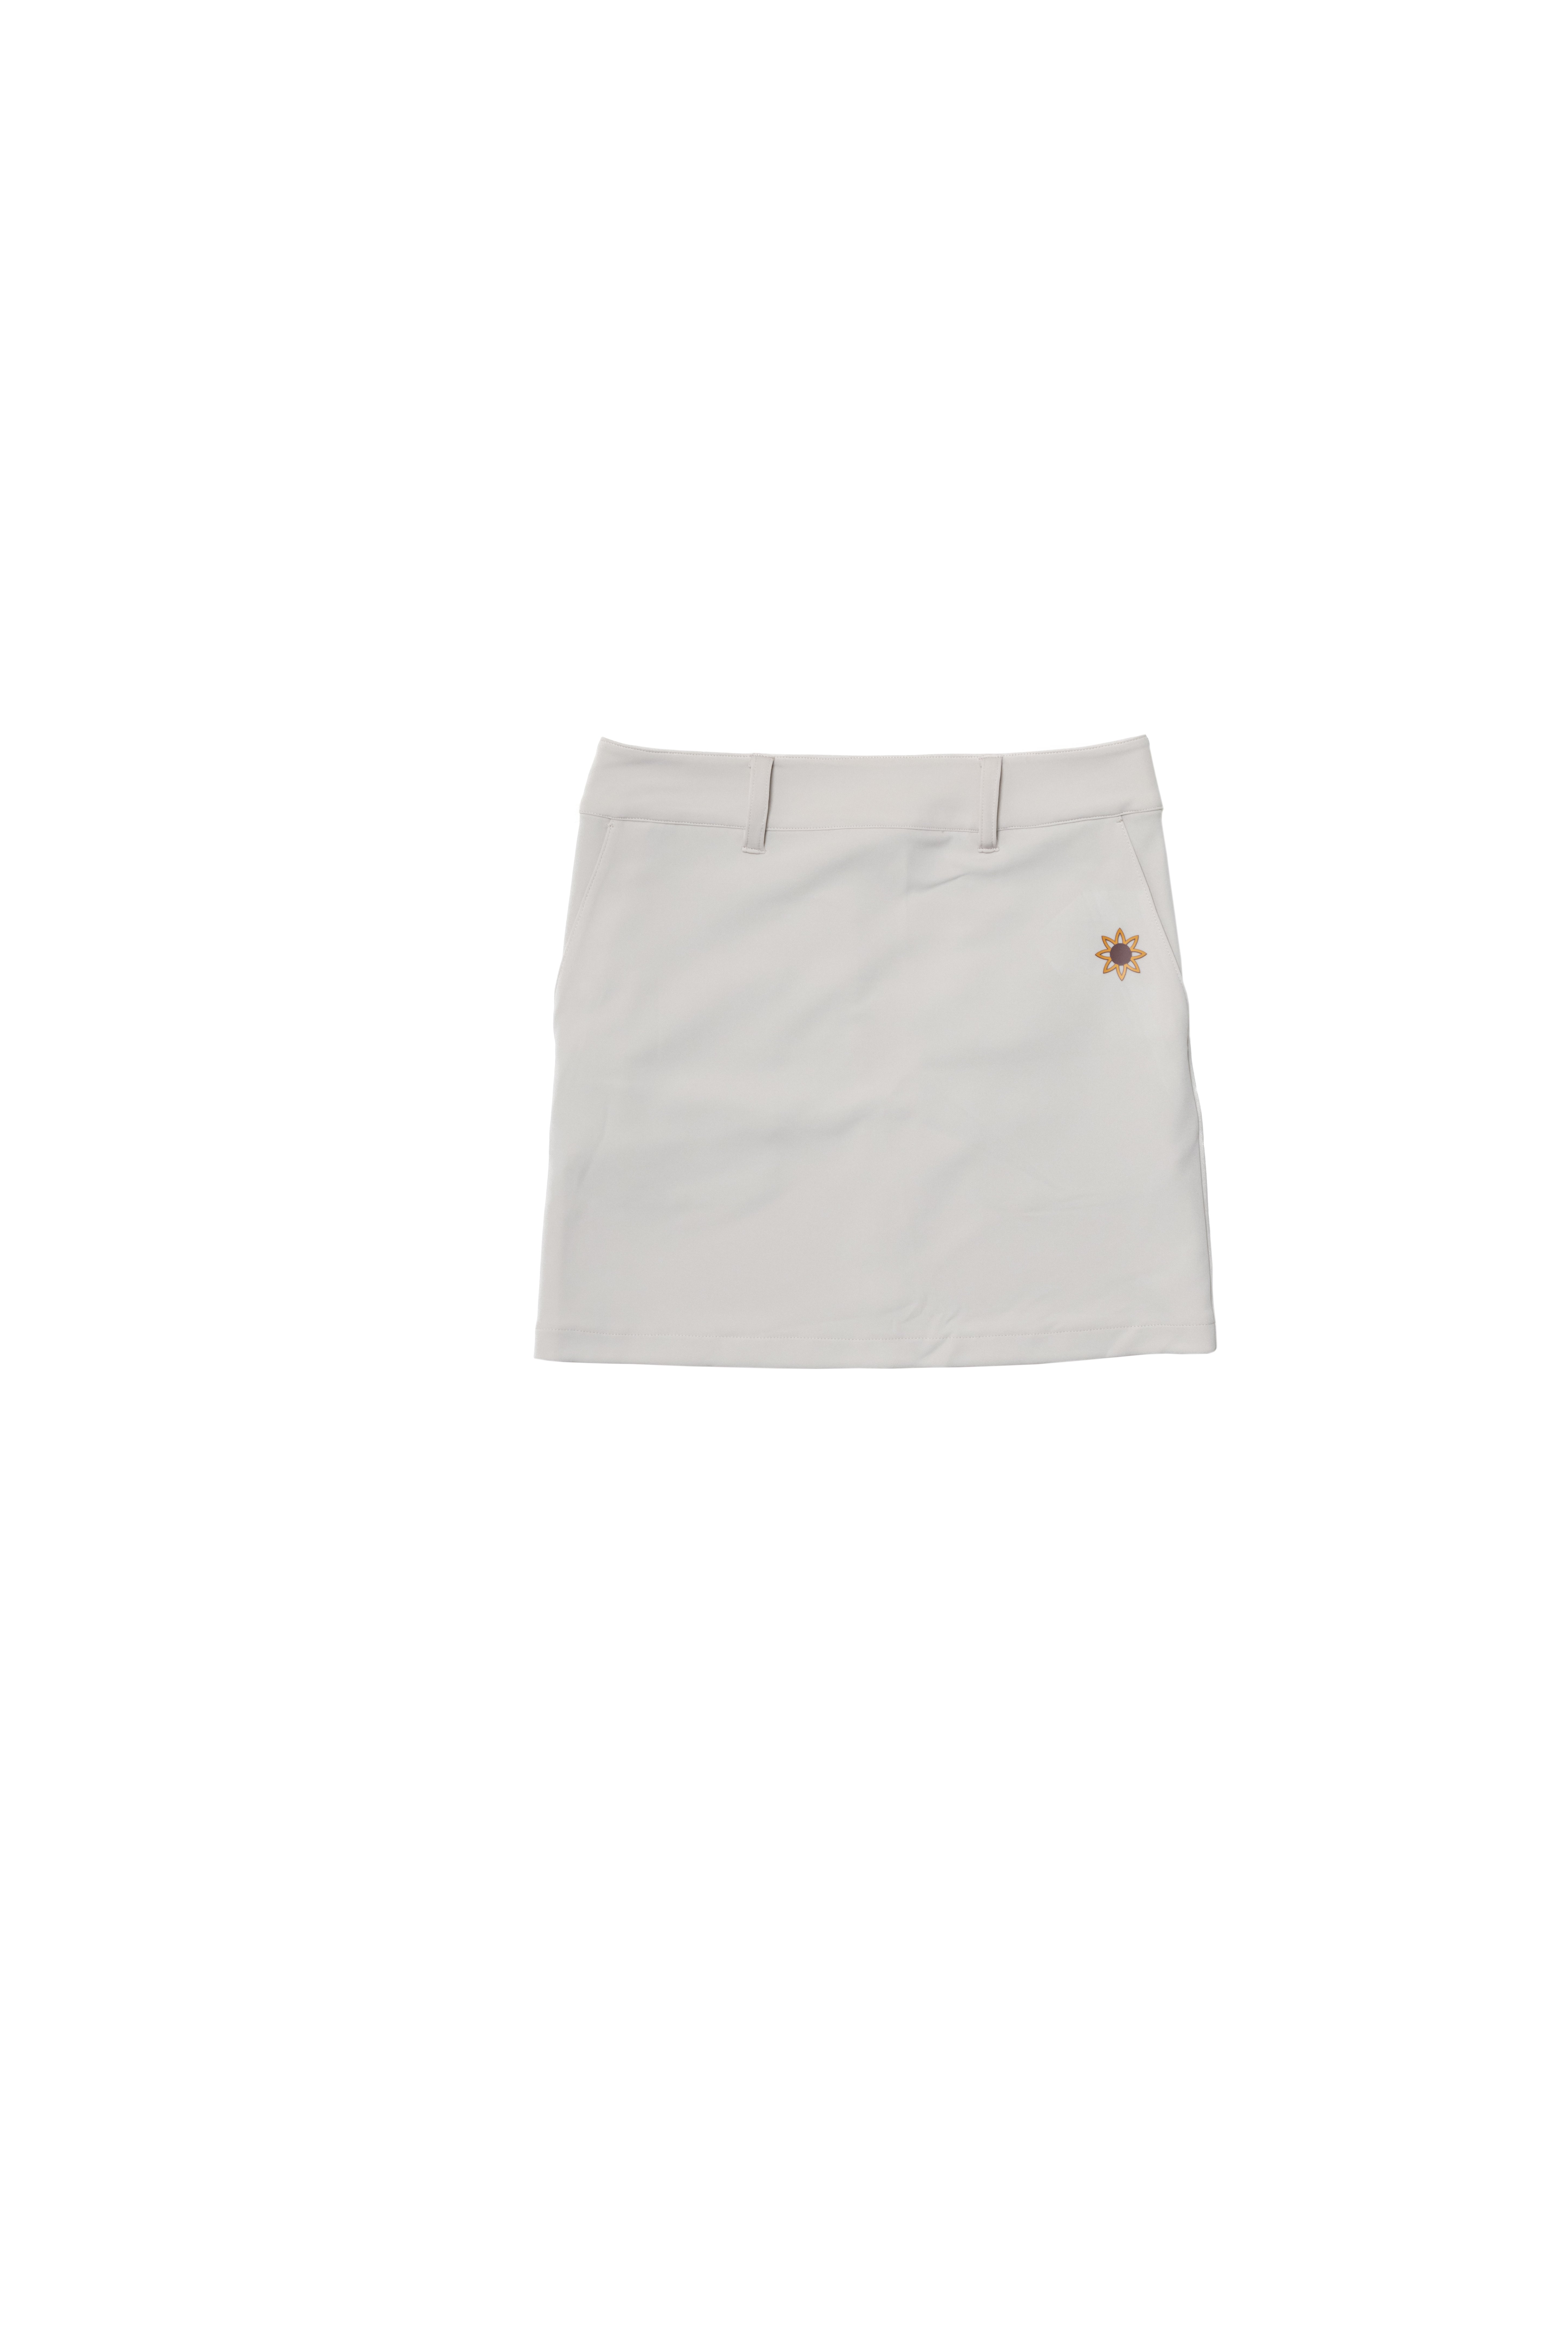 <img class='new_mark_img1' src='https://img.shop-pro.jp/img/new/icons50.gif' style='border:none;display:inline;margin:0px;padding:0px;width:auto;' />SIDE ZIP SKIRT<br />beige